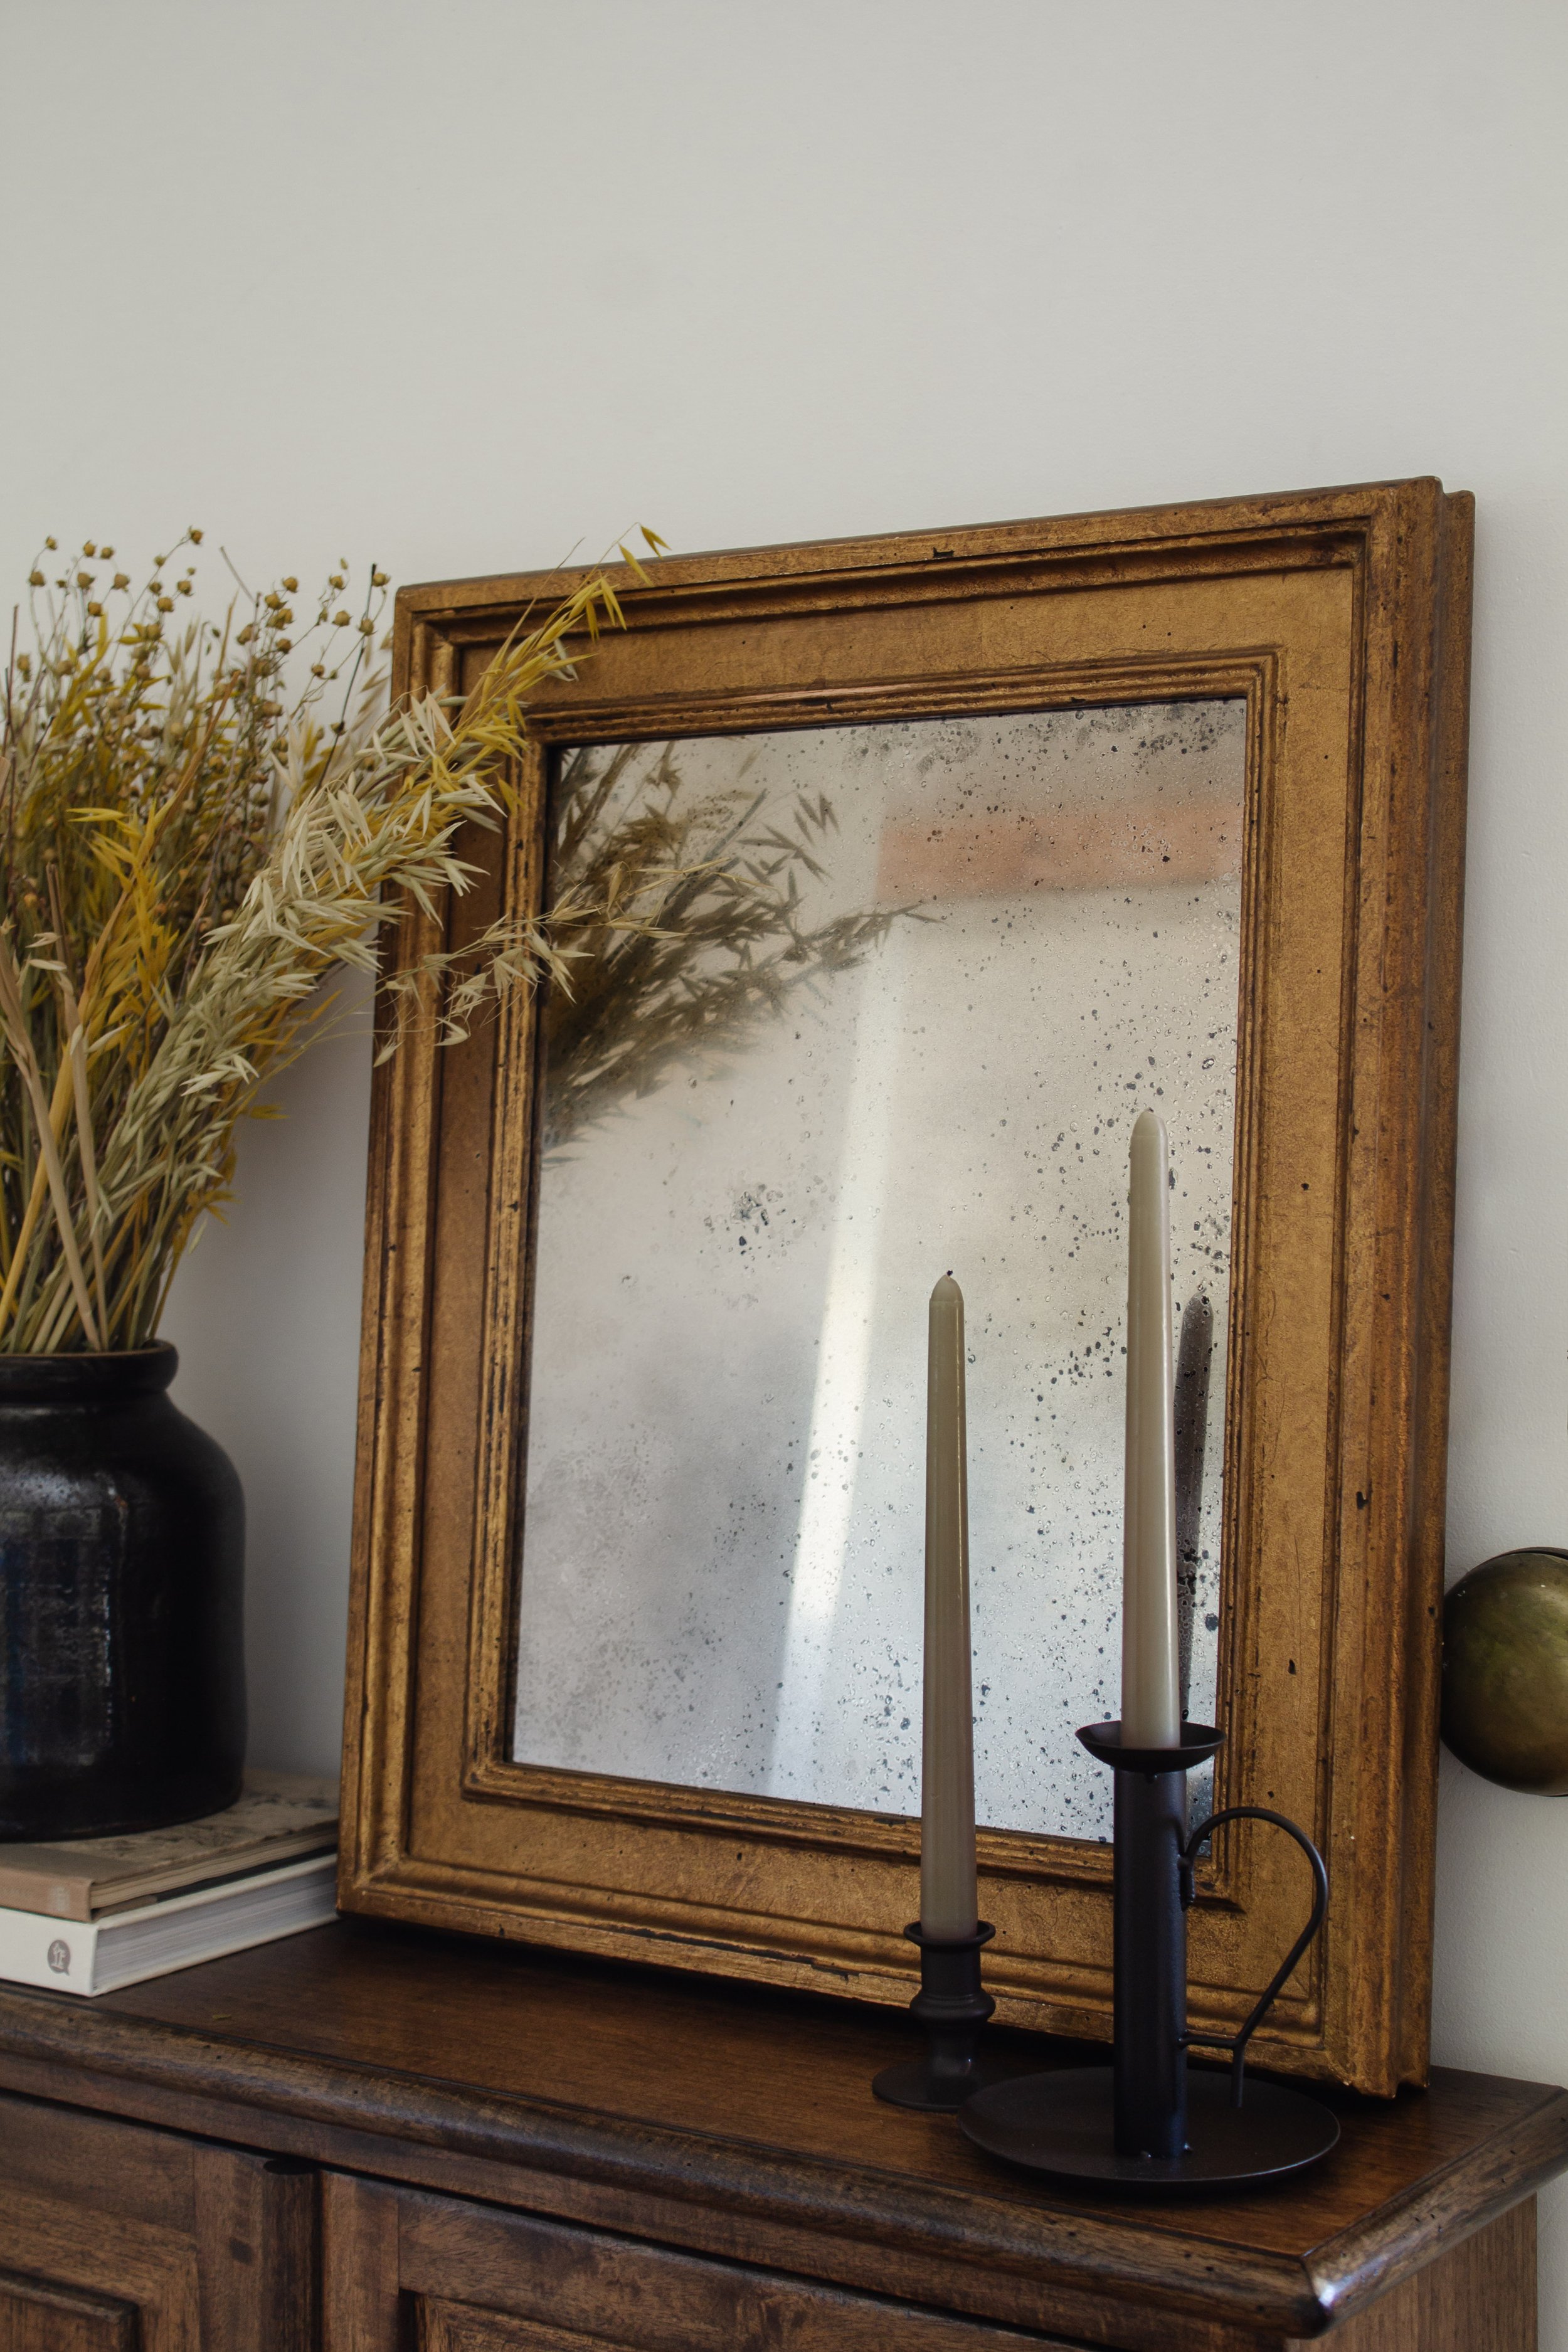 How To: DIY Antique Mirror (For Less than $15)